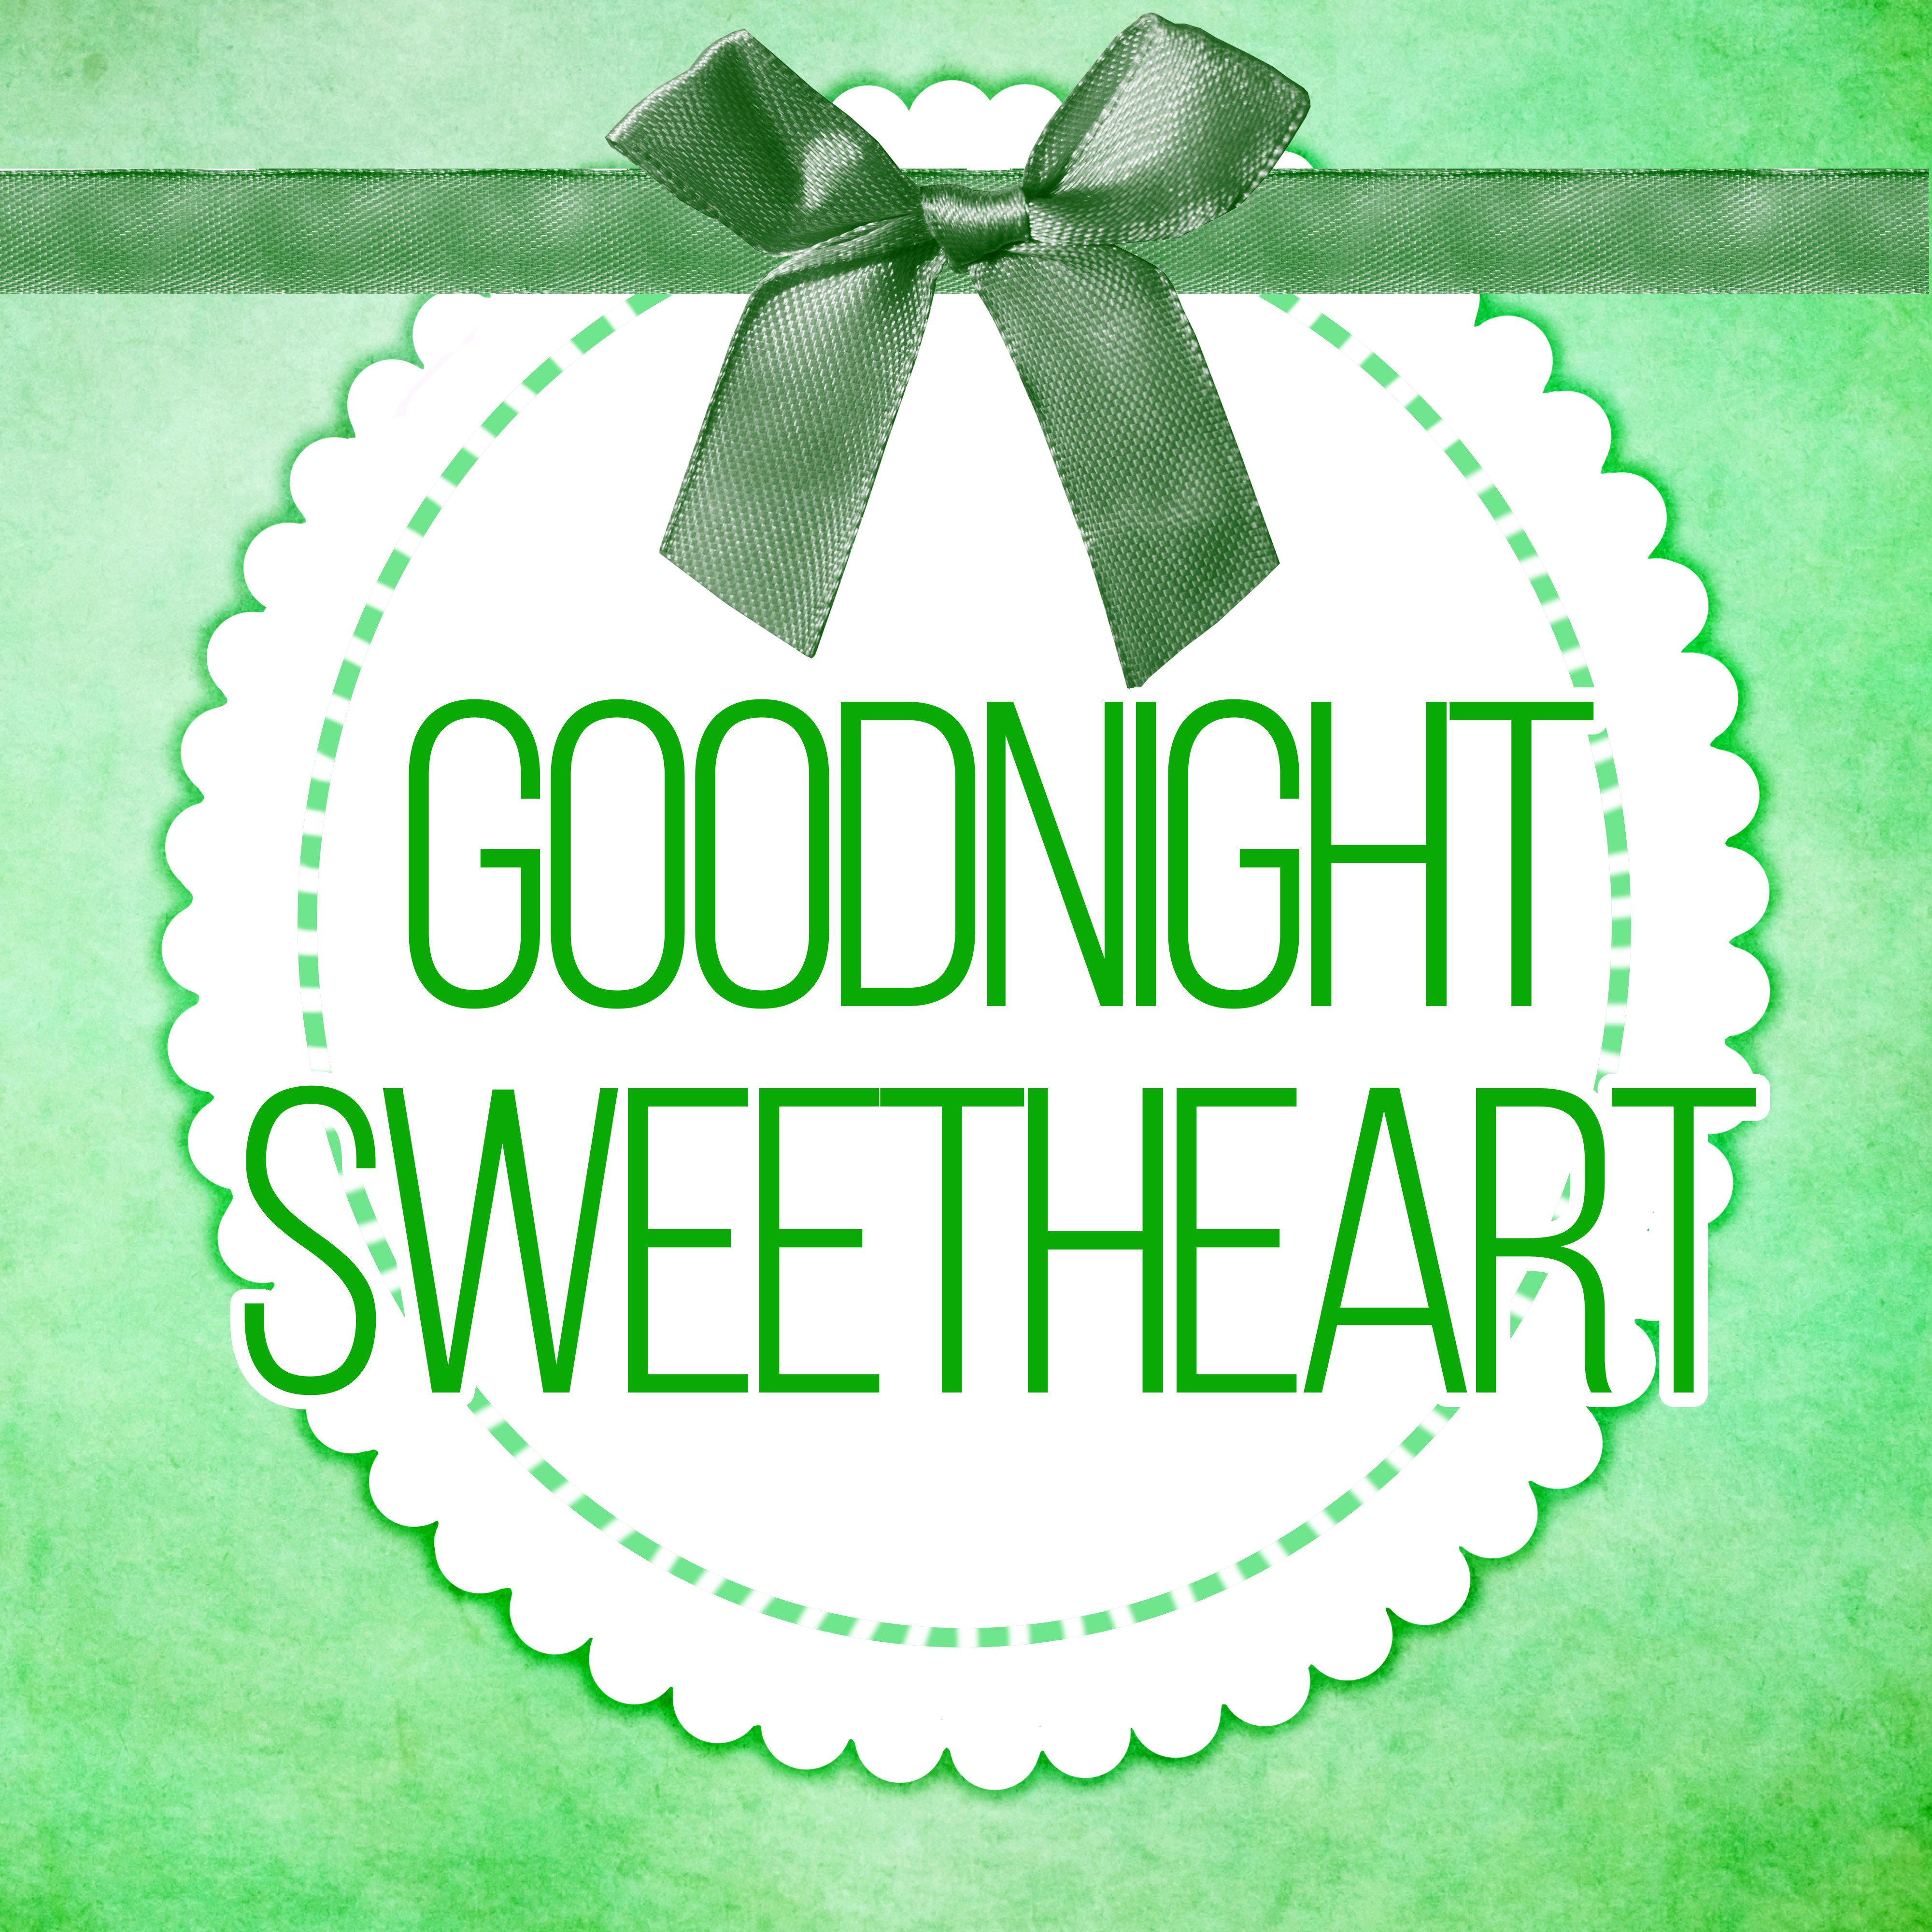 Goodnight Sweetheart - Soothing Sounds of Nature, White Noise, Inner Peace, Sleep Hypnosis, Sweet Dreams